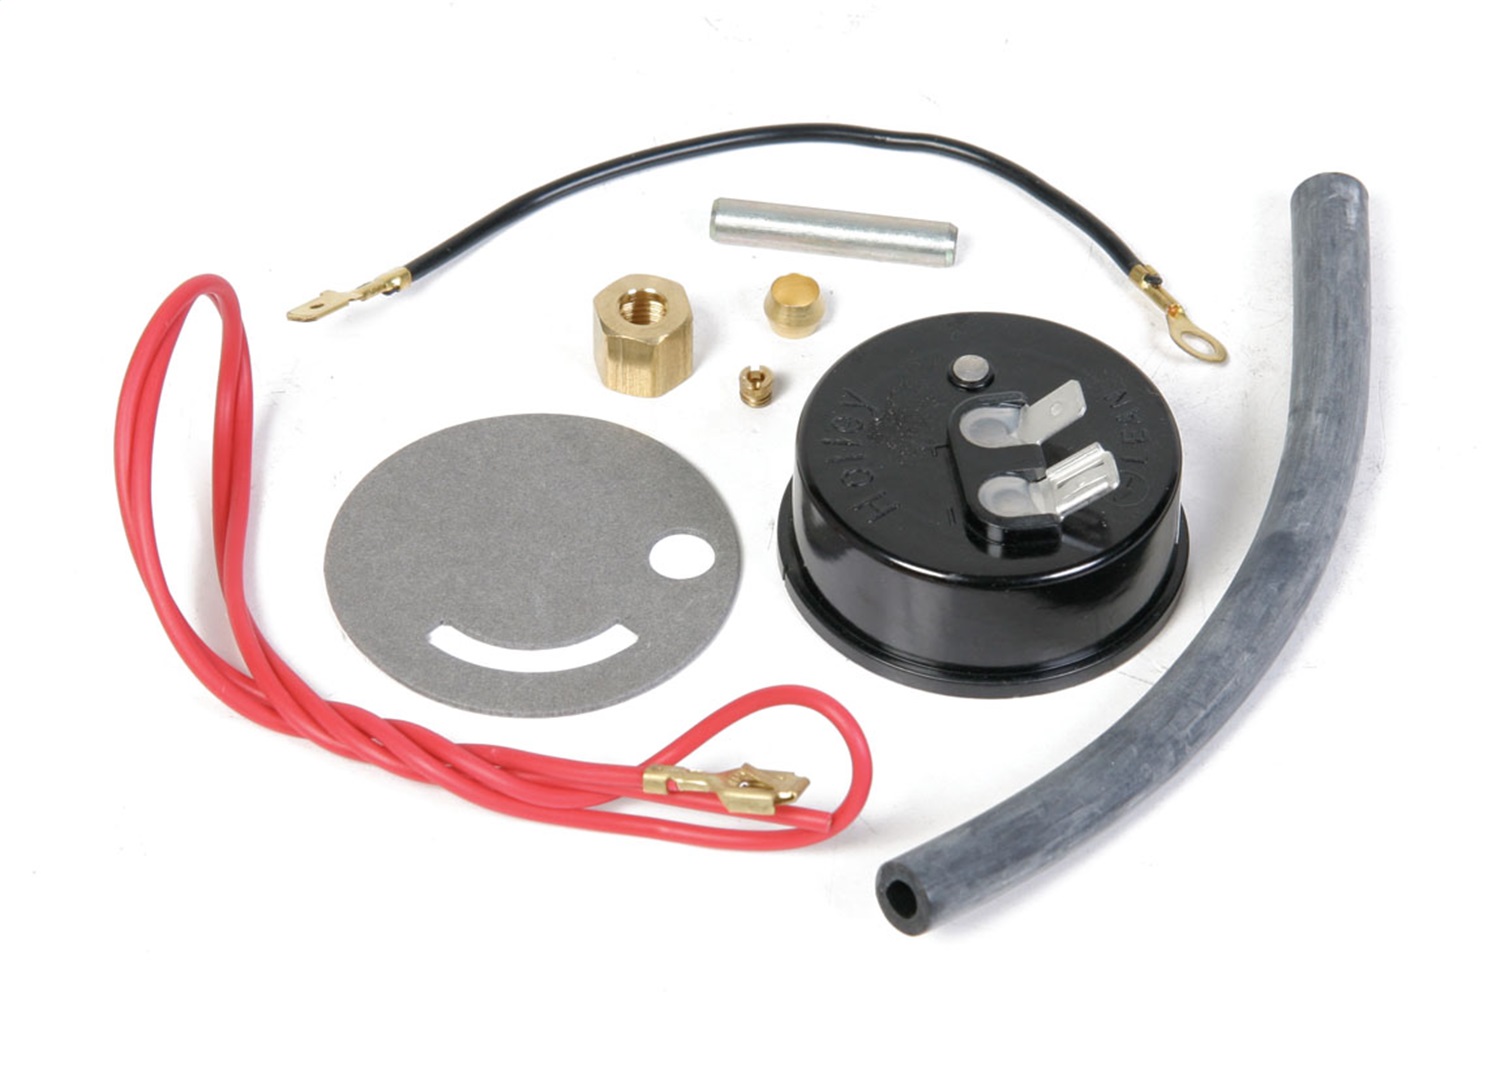 Holley Performance Holley Performance 45-226 Choke Conversion Kit